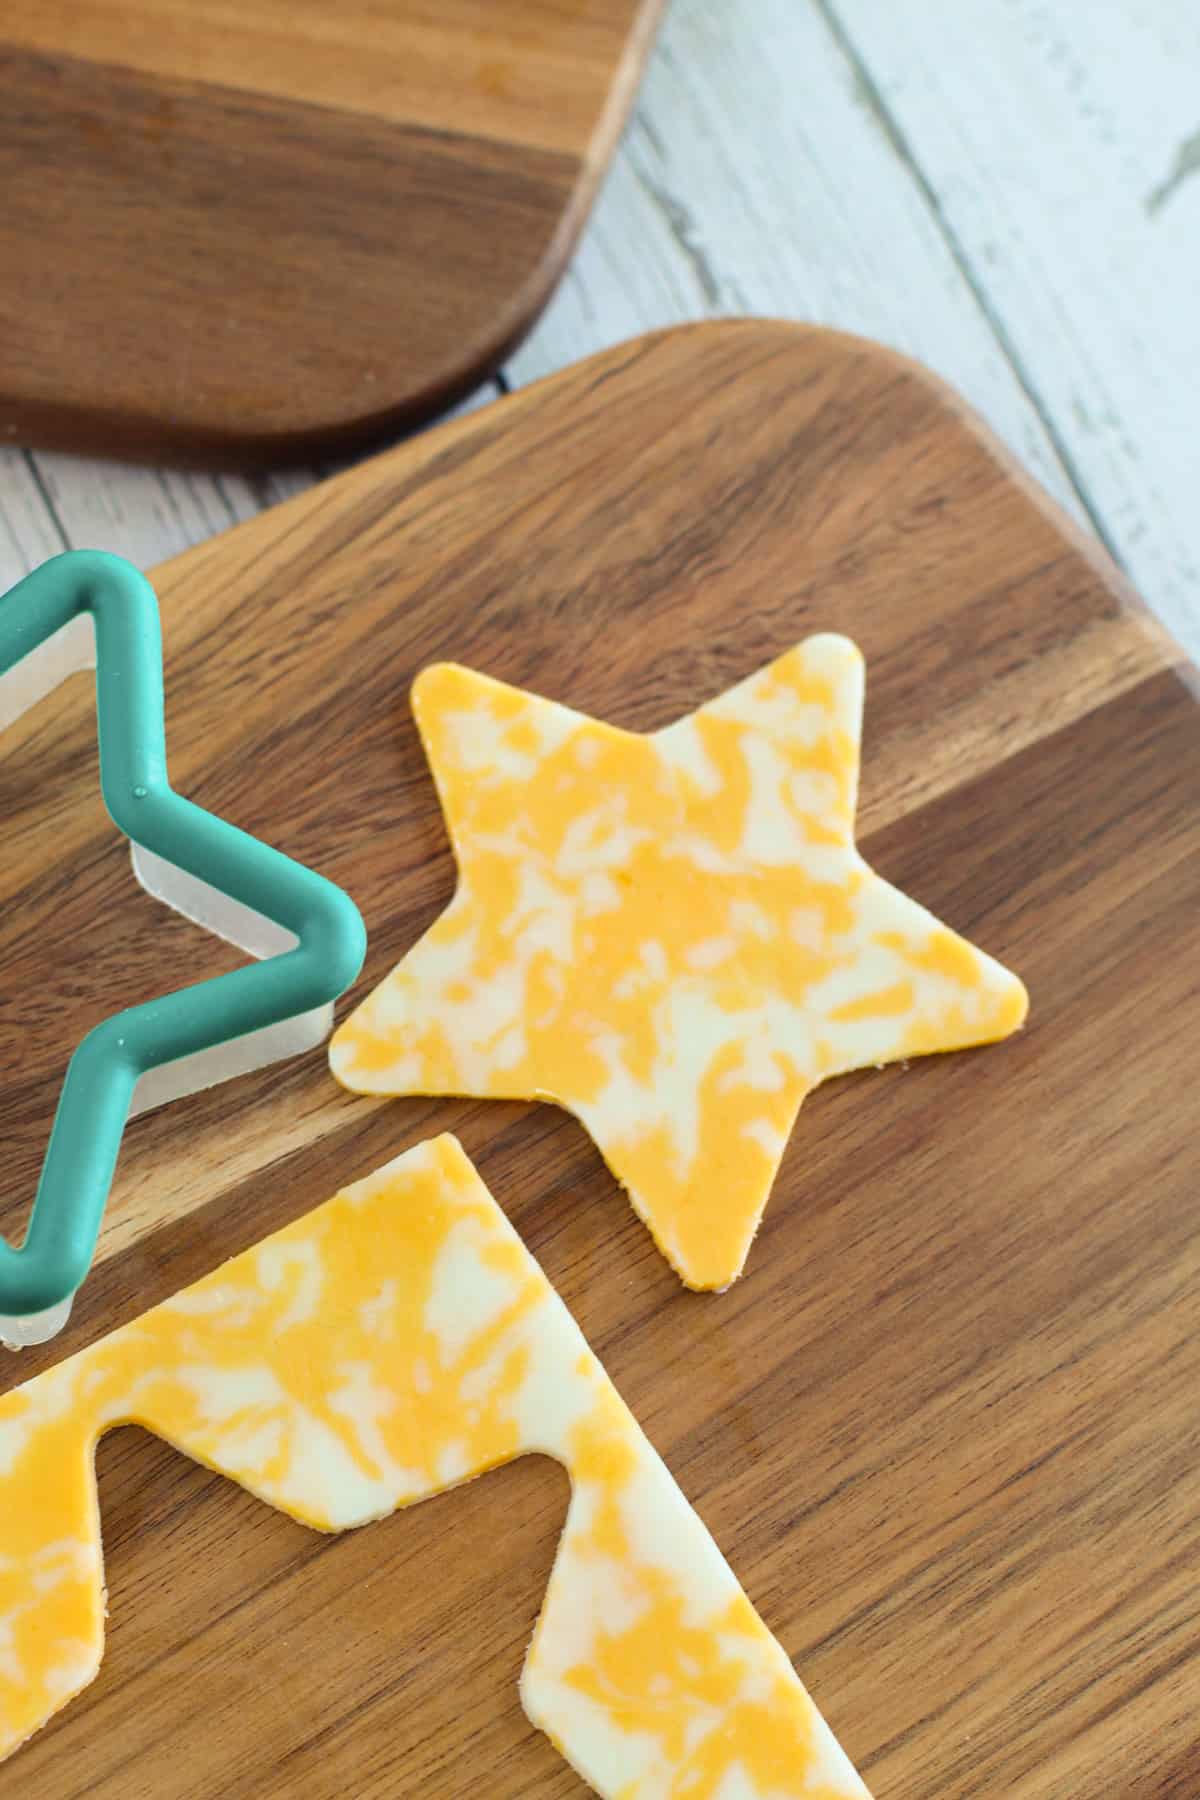 Star cut out of slice of cheese with a cookie cutter.